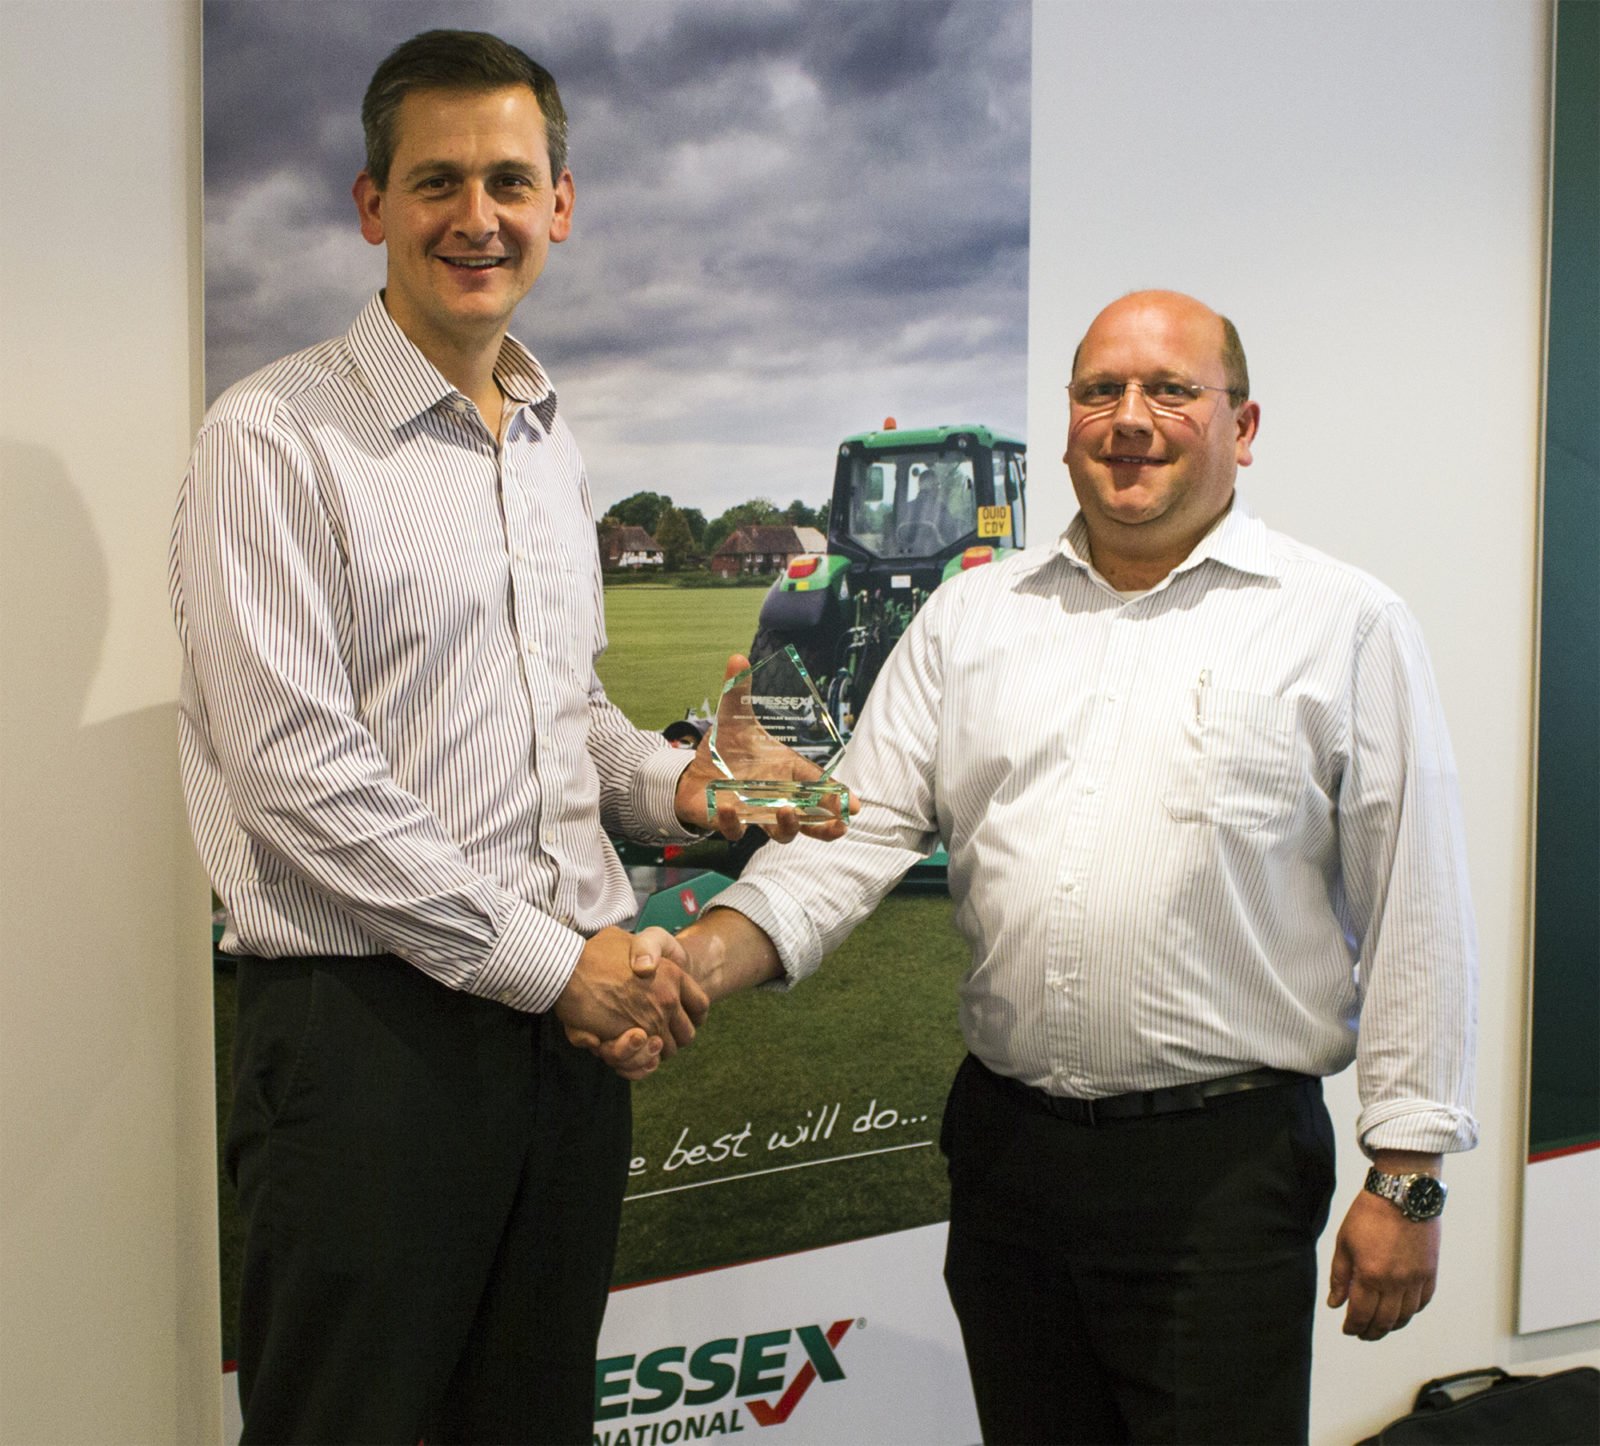 Award 2 - professional groundcare & agricultural equipment